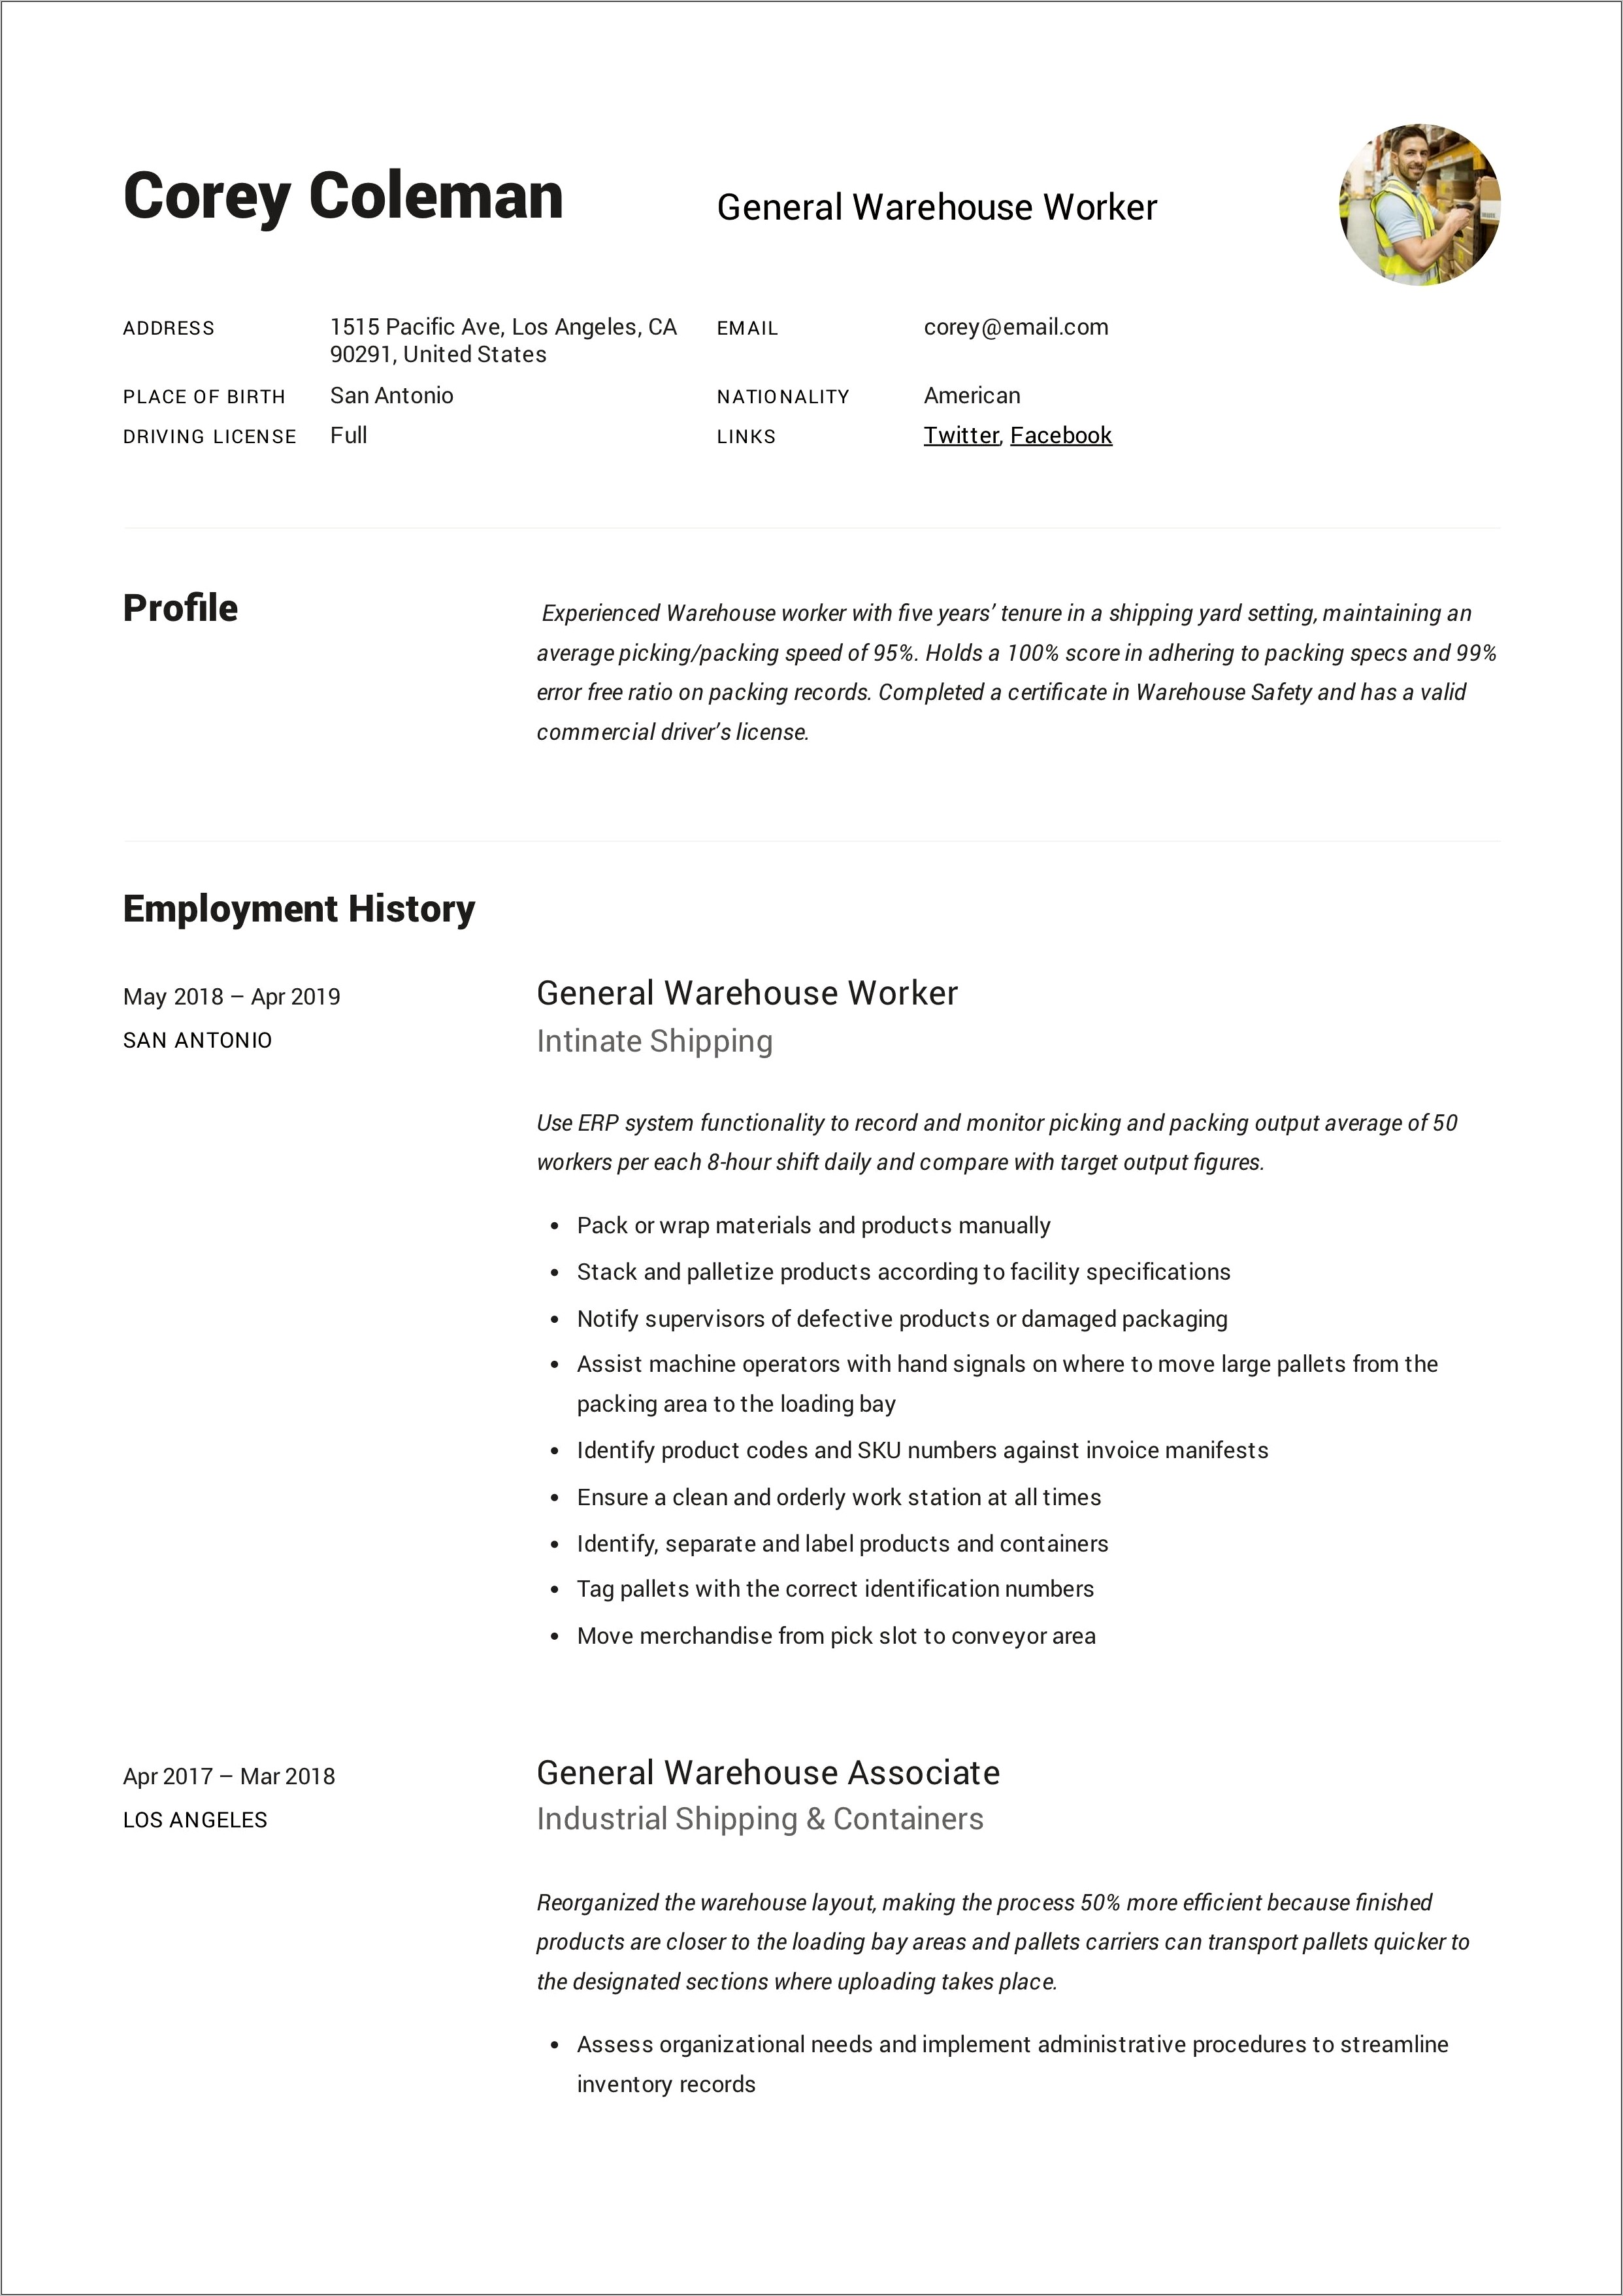 Resume Objective For A Warehouse Position